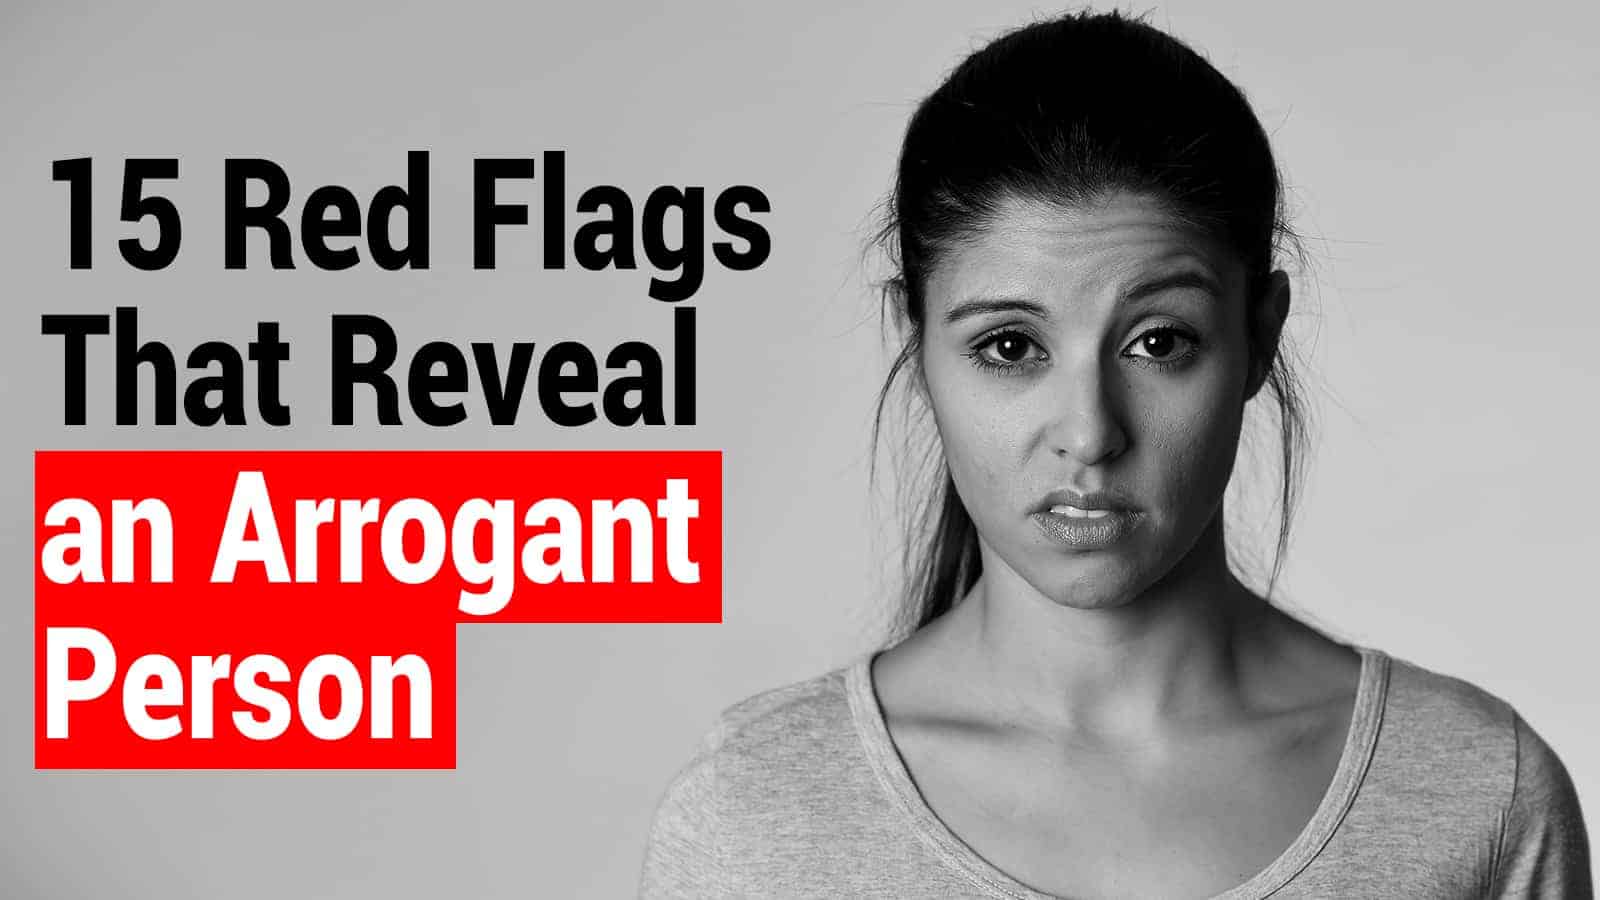 15 Red Flags That Reveal an Arrogant Person